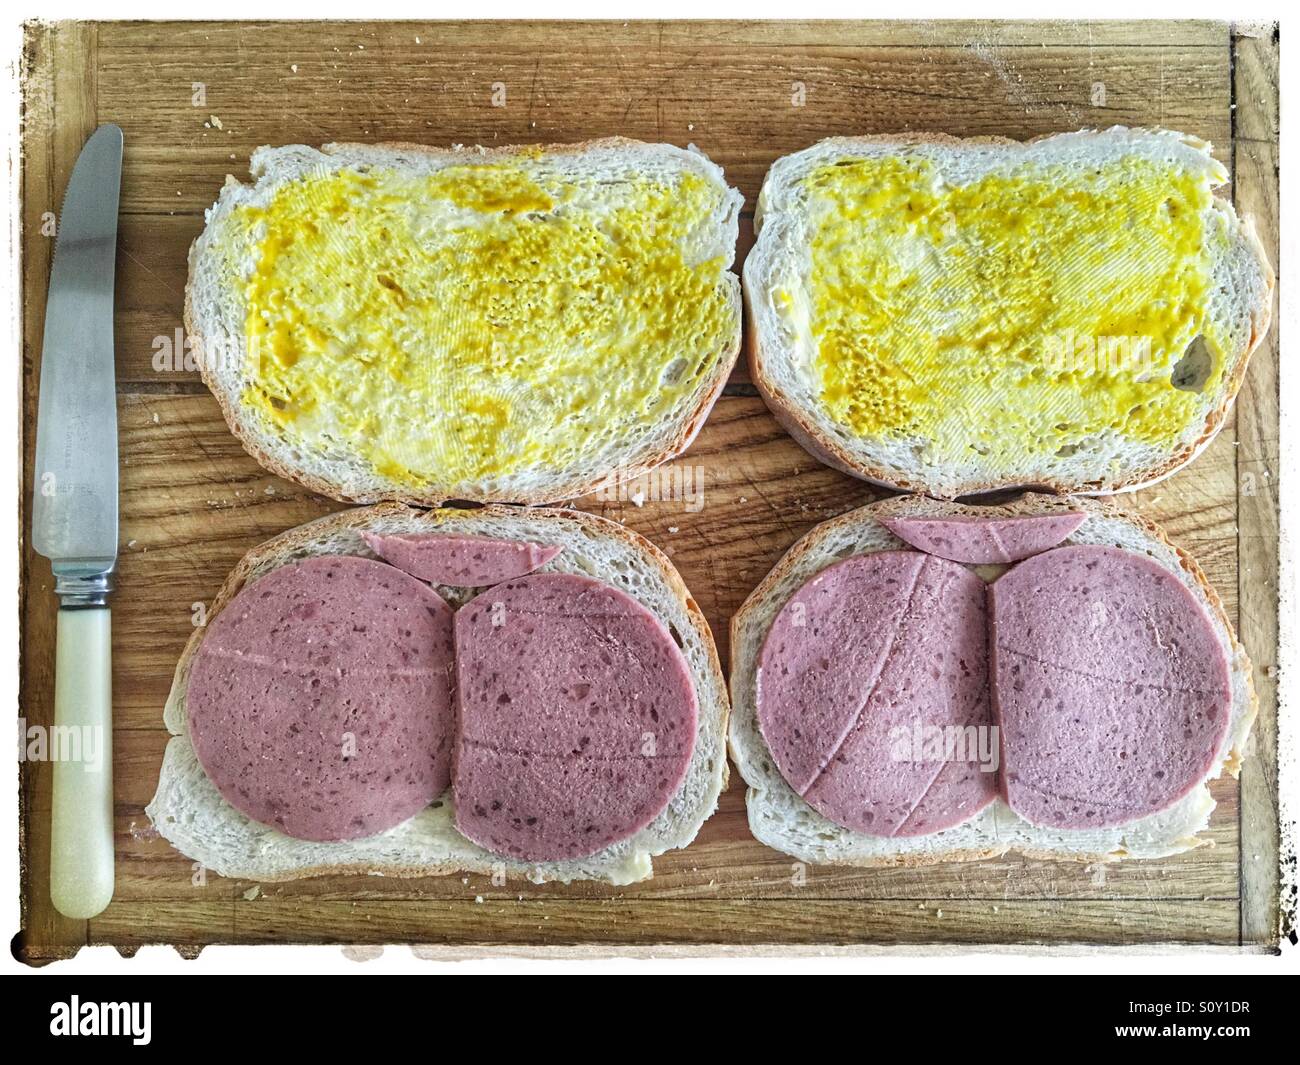 Liver sausage sandwiches with kitchen knife resting on a old wooden cutting board. Viewed from above. Stock Photo